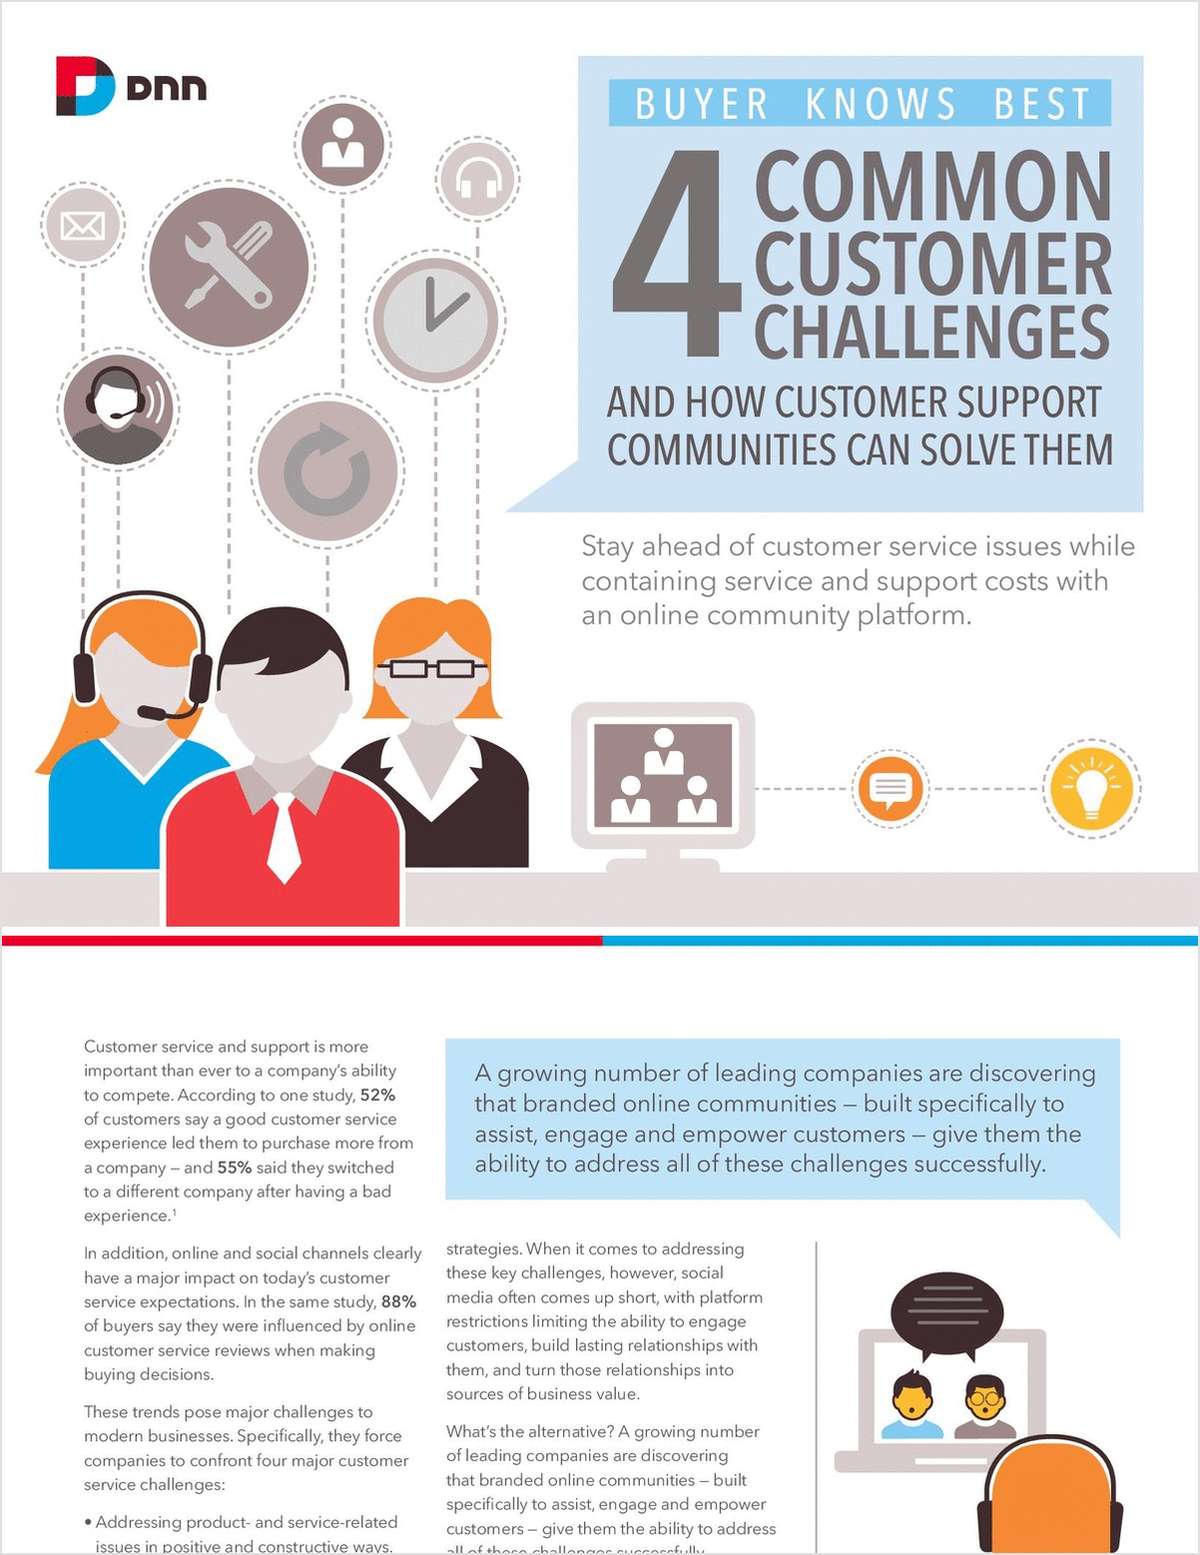 4 Common Customer Challenges -- and How Customer Support Communities Can Solve Them